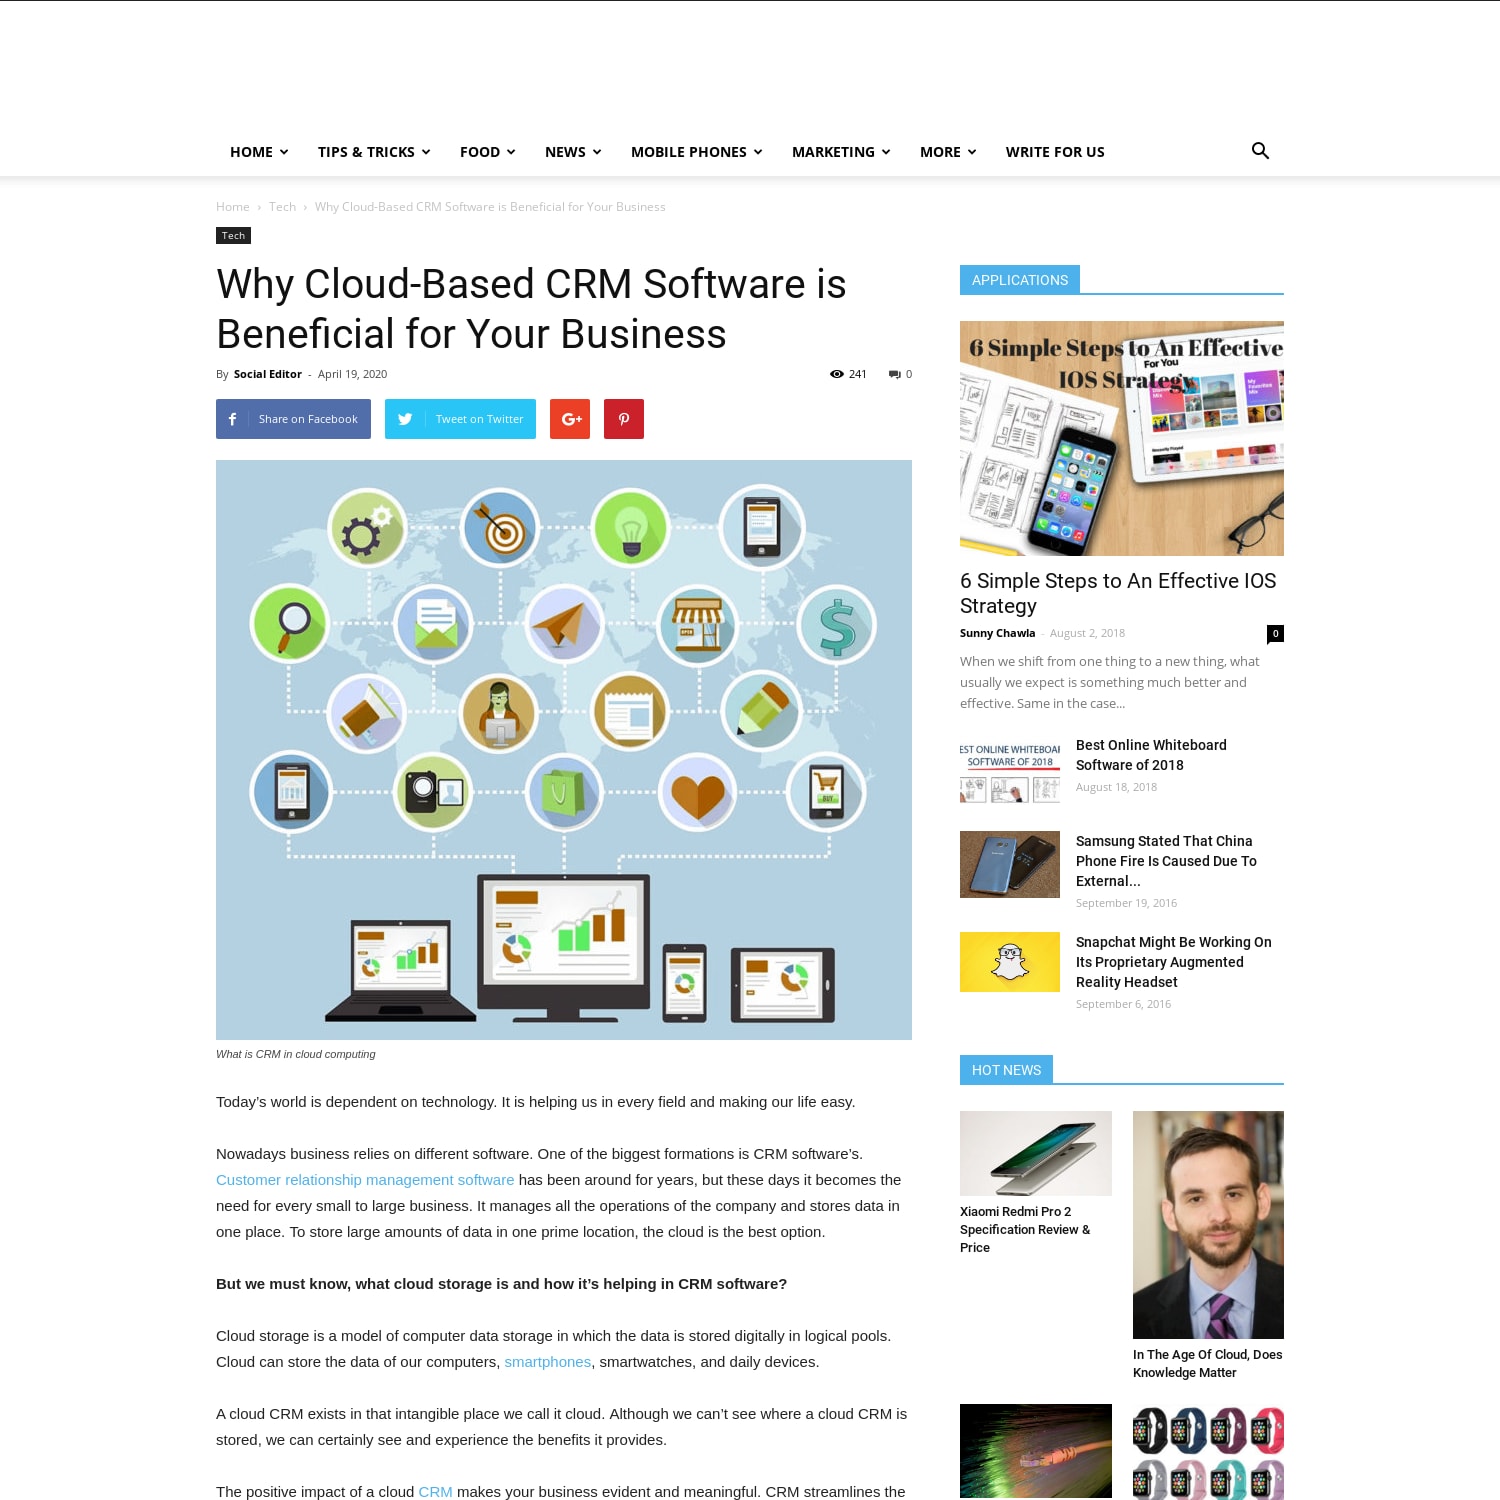 Why Cloud-Based CRM Software is Beneficial for Your Business